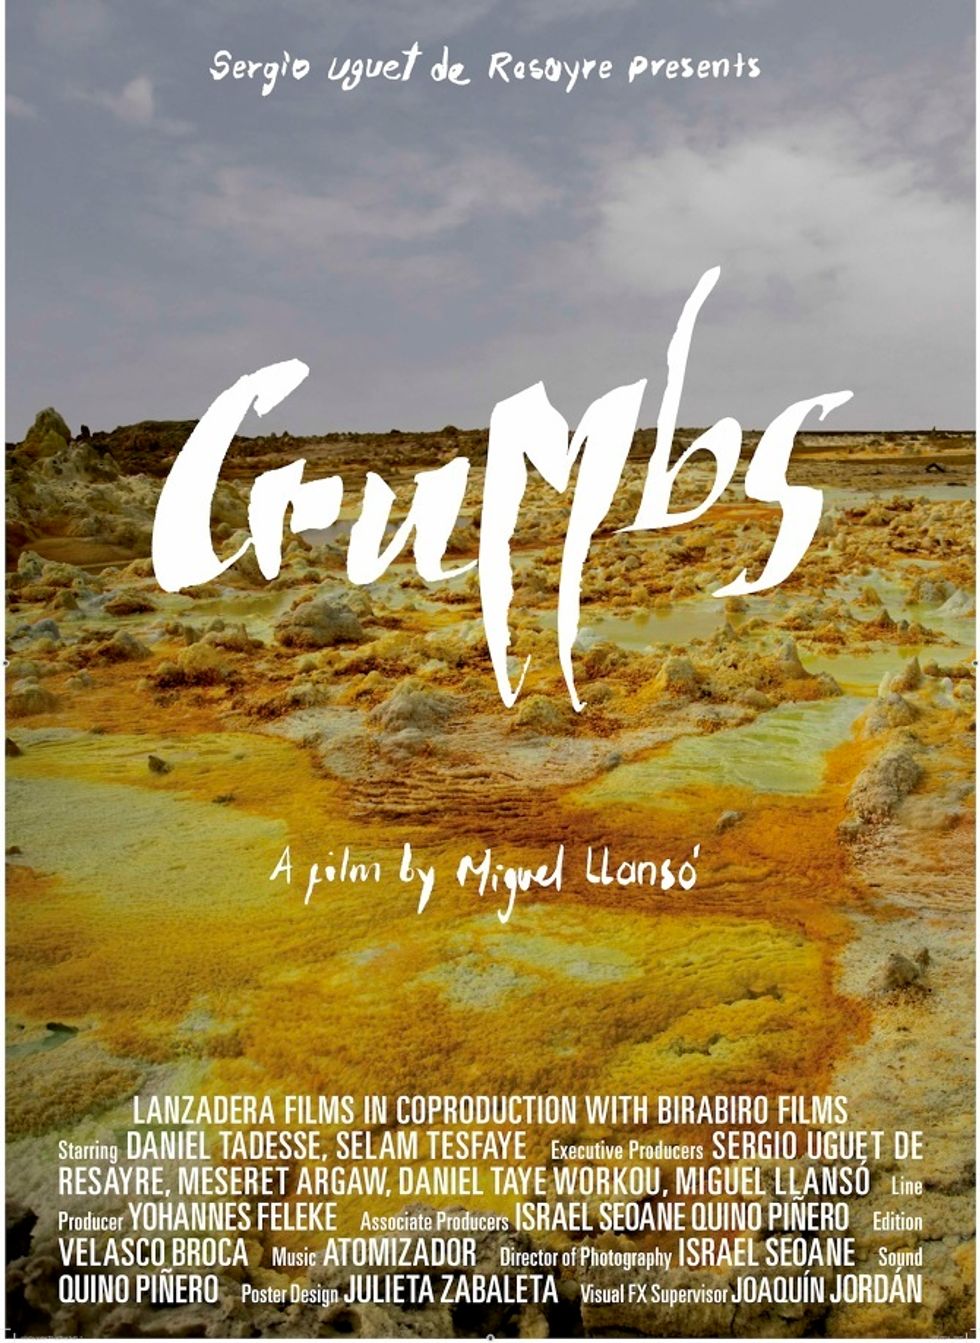 Ethiopia’s Critically-Acclaimed Post-Apocalyptic Romance ‘Crumbs’ is Available for Streaming in the U.S.